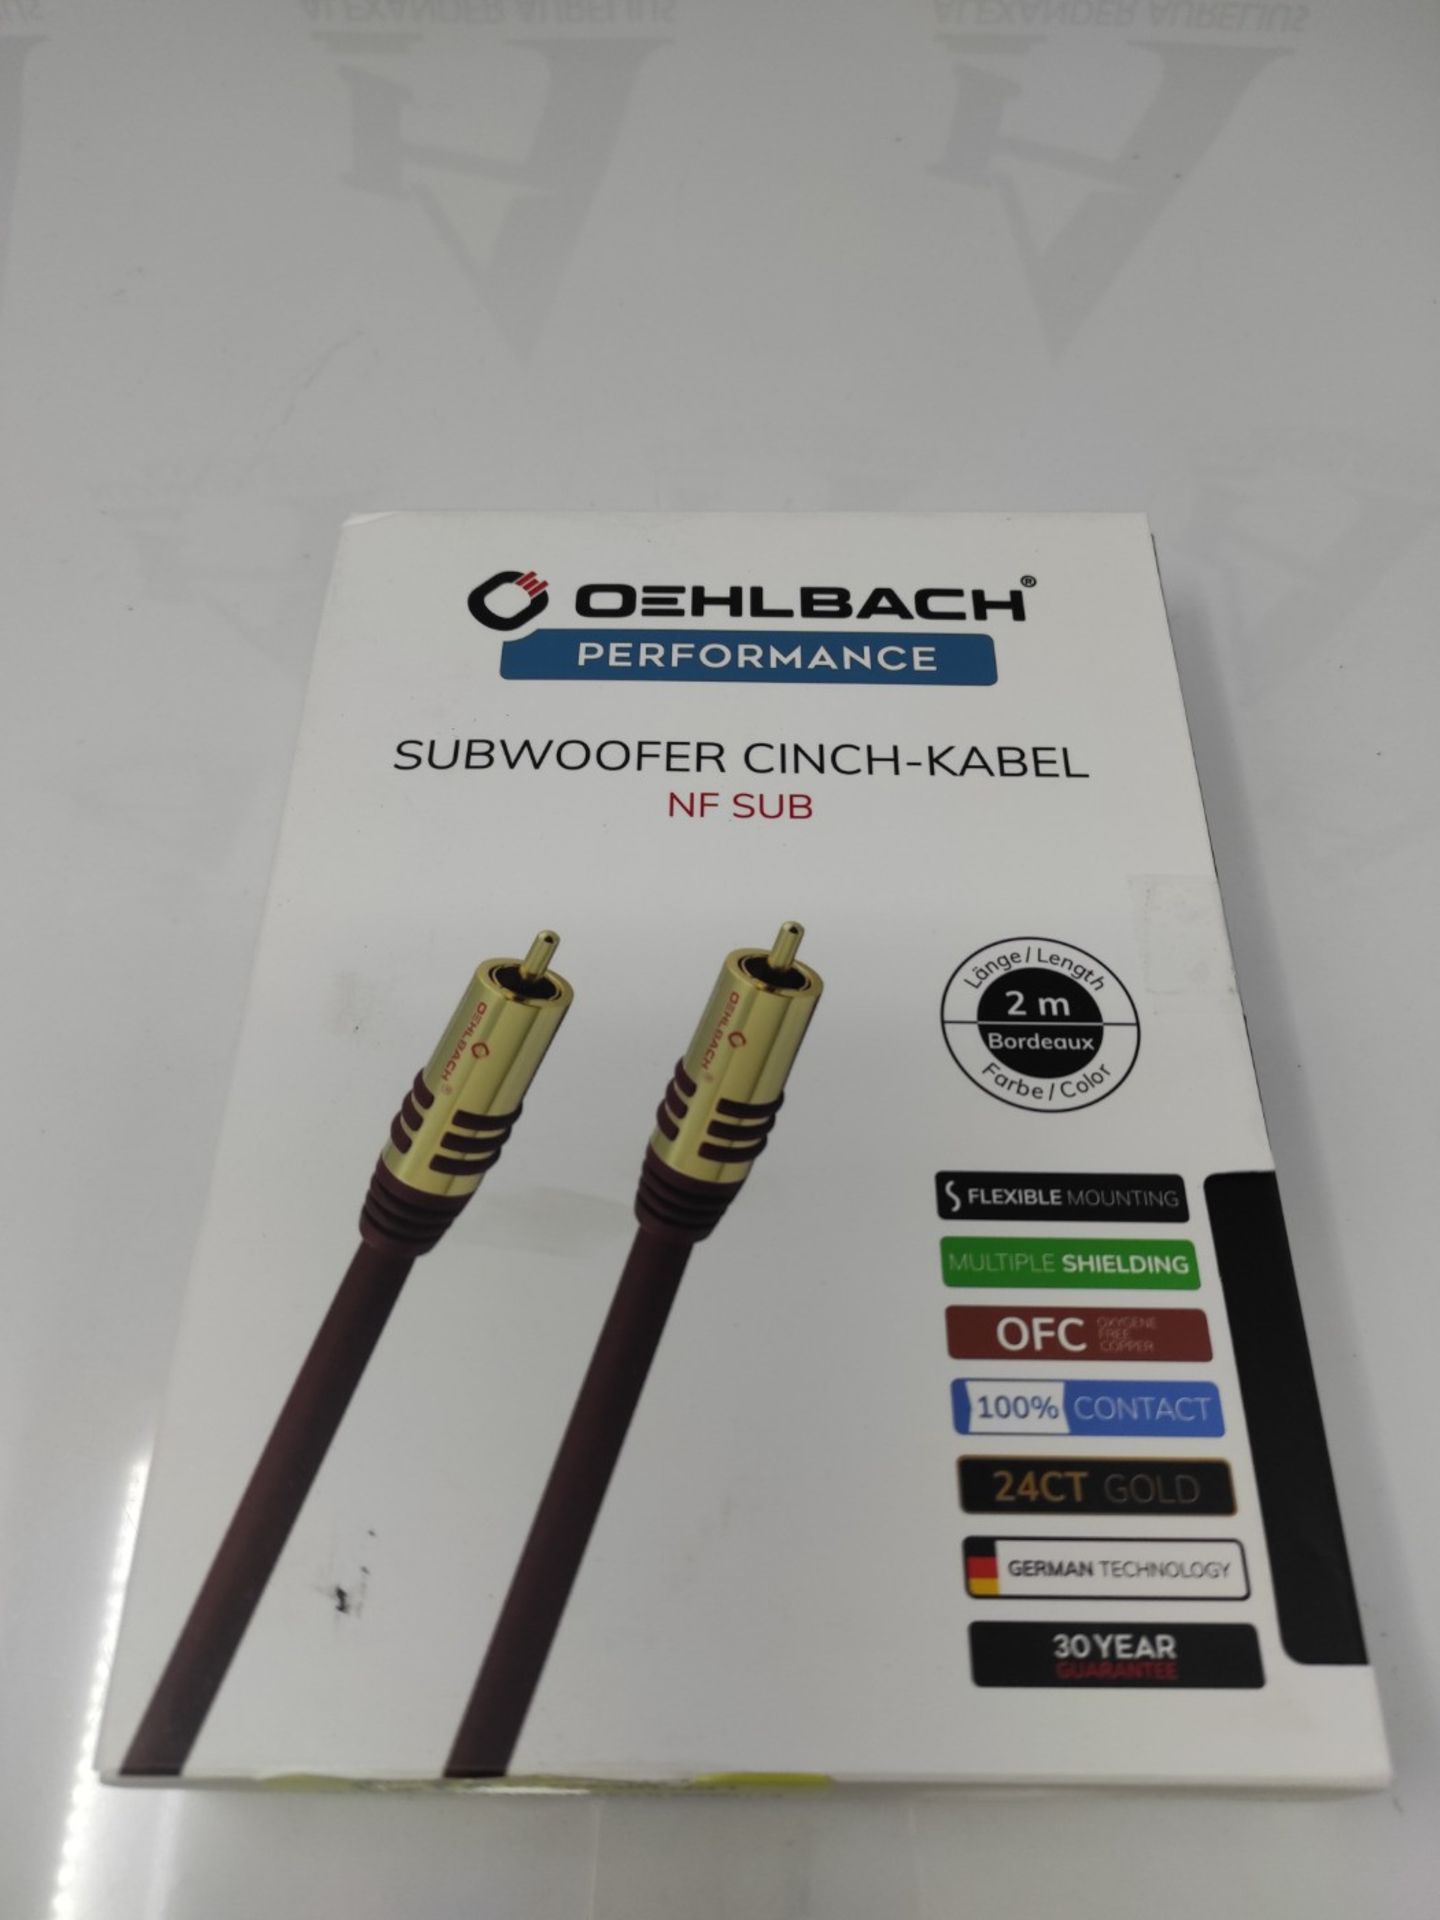 [NEW] Oehlbach NF Sub, RCA Subwoofer Cable - Audio Cable - round - OFC - 2m - Bordeaux - Image 2 of 2